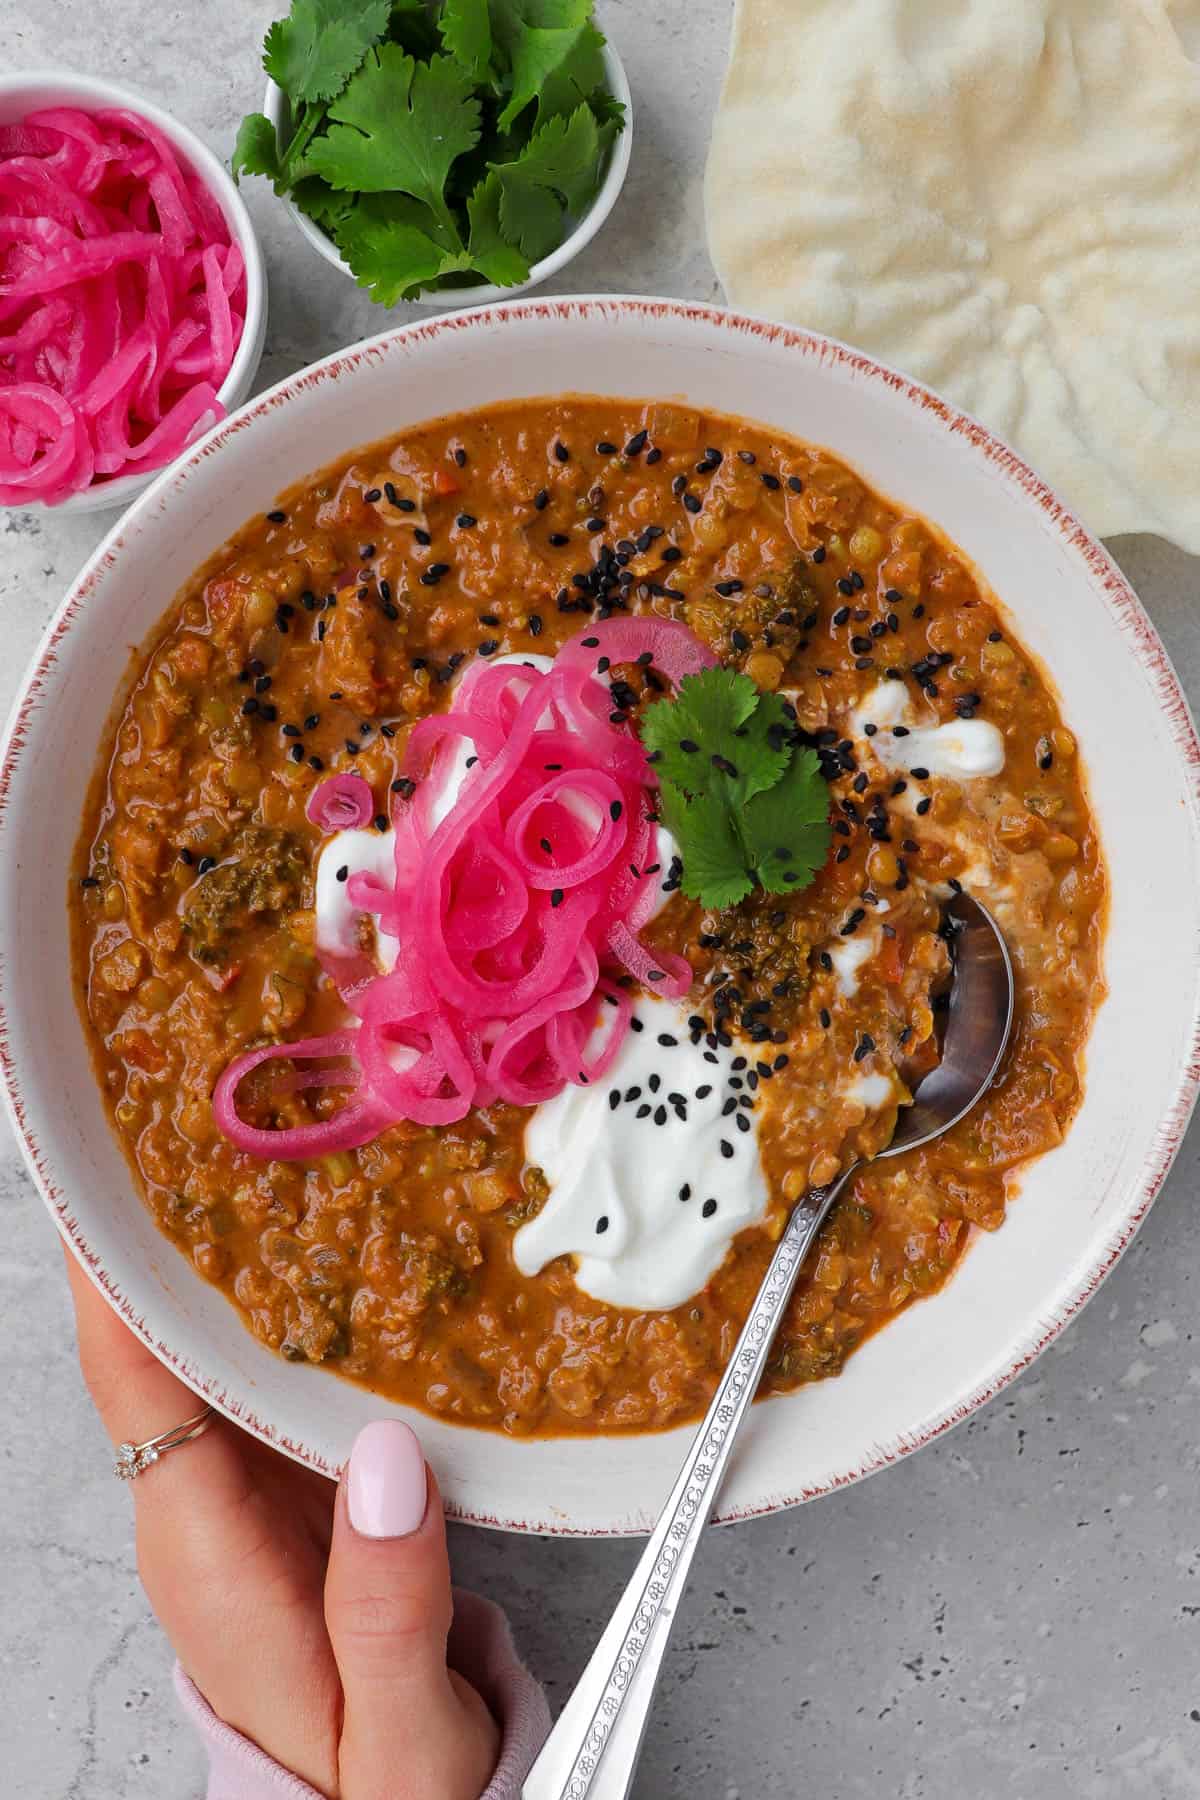 Holding bowl of dahl with spoon. Topped with pickled onions, yoghurt, coriander leaves and black sesame seeds for garnish.